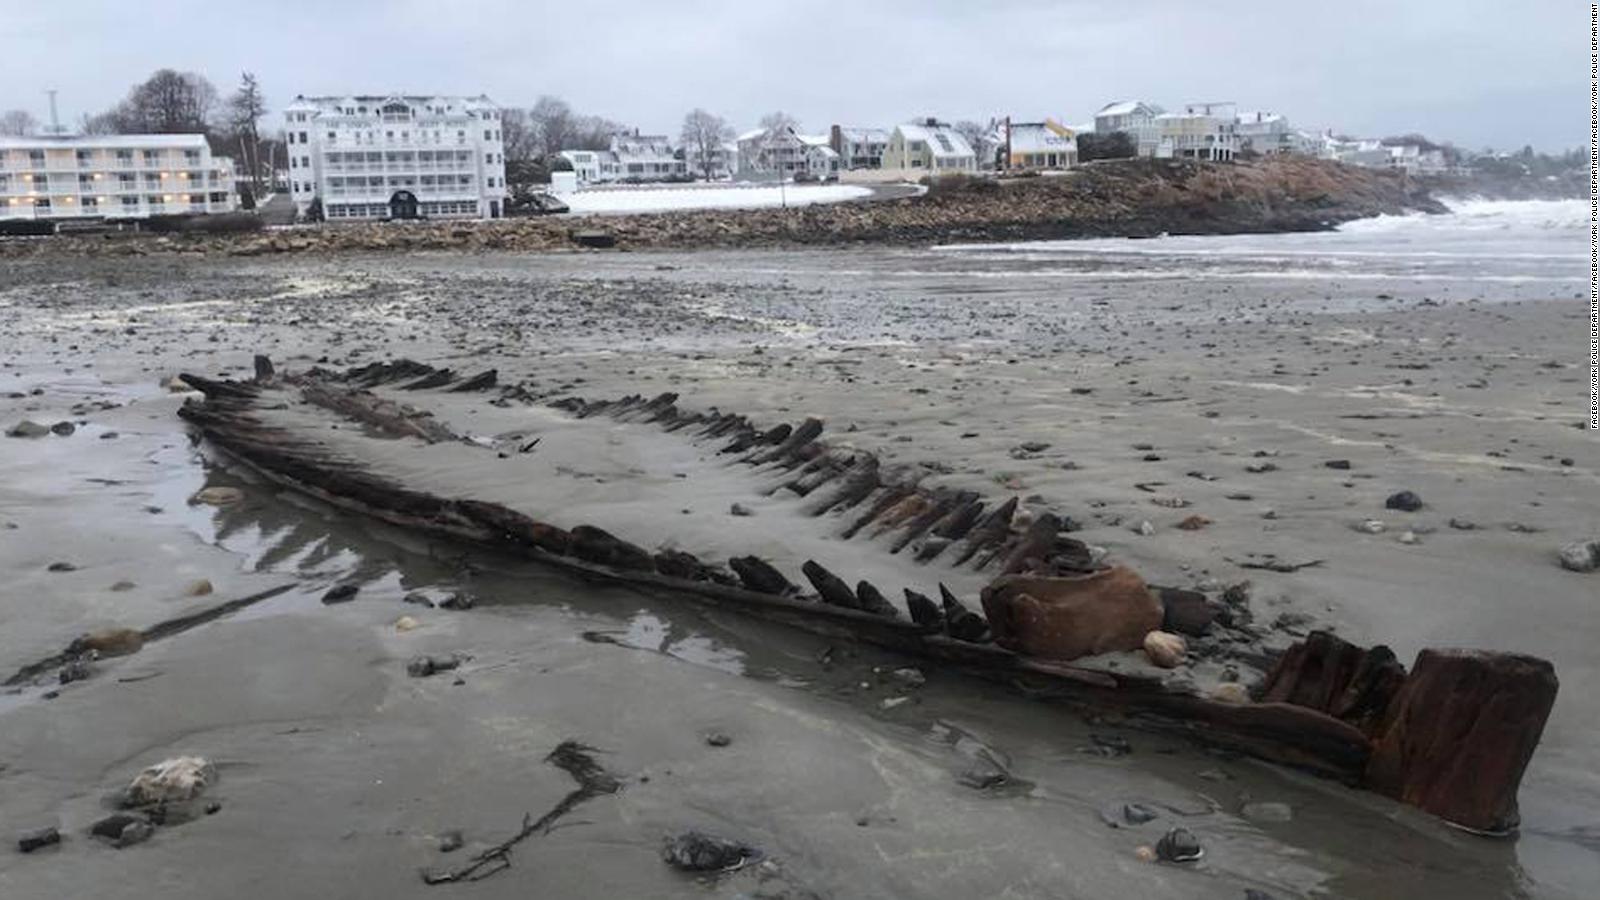 Exploring a Maine Shipwreck That May Date to the Colonial Era